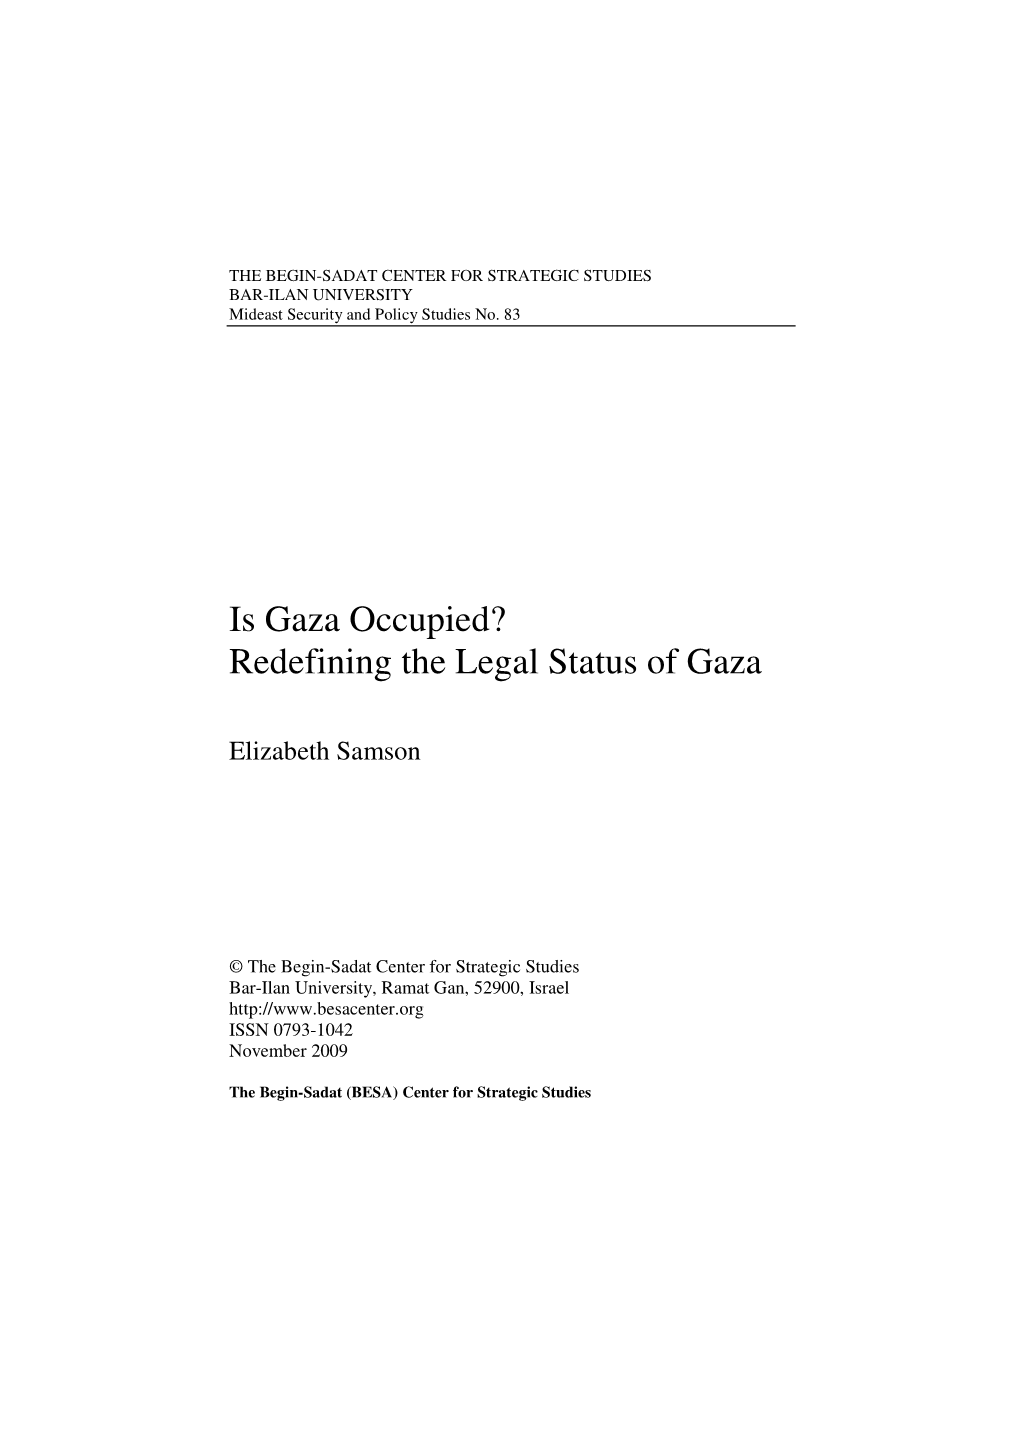 Is Gaza Occupied? Redefining the Legal Status of Gaza